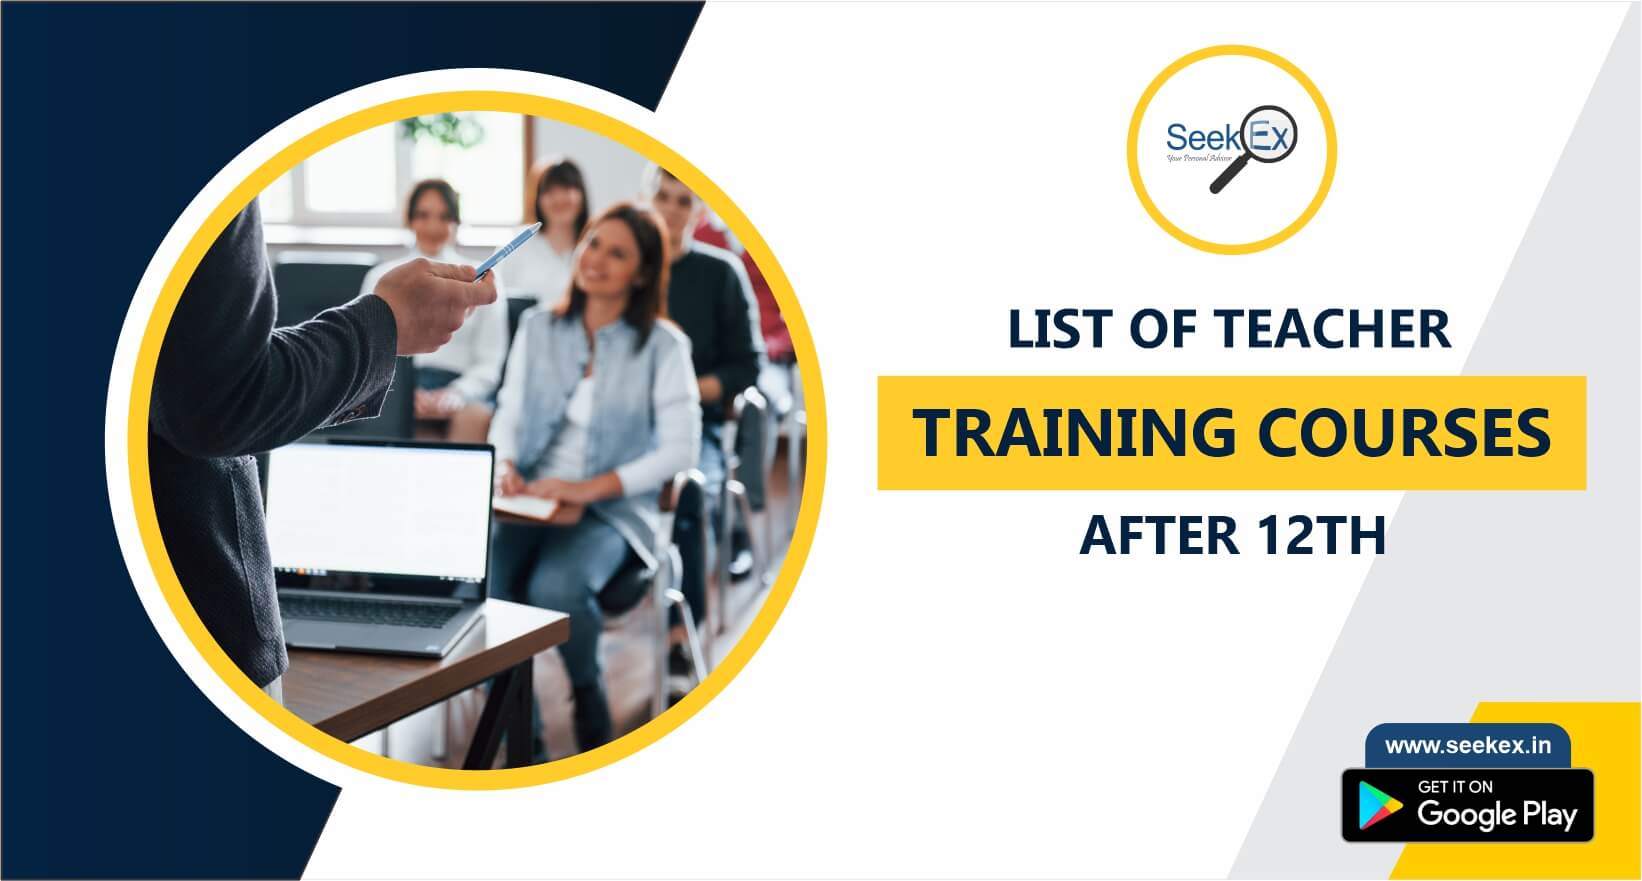 List of Teacher Training Courses After 12th